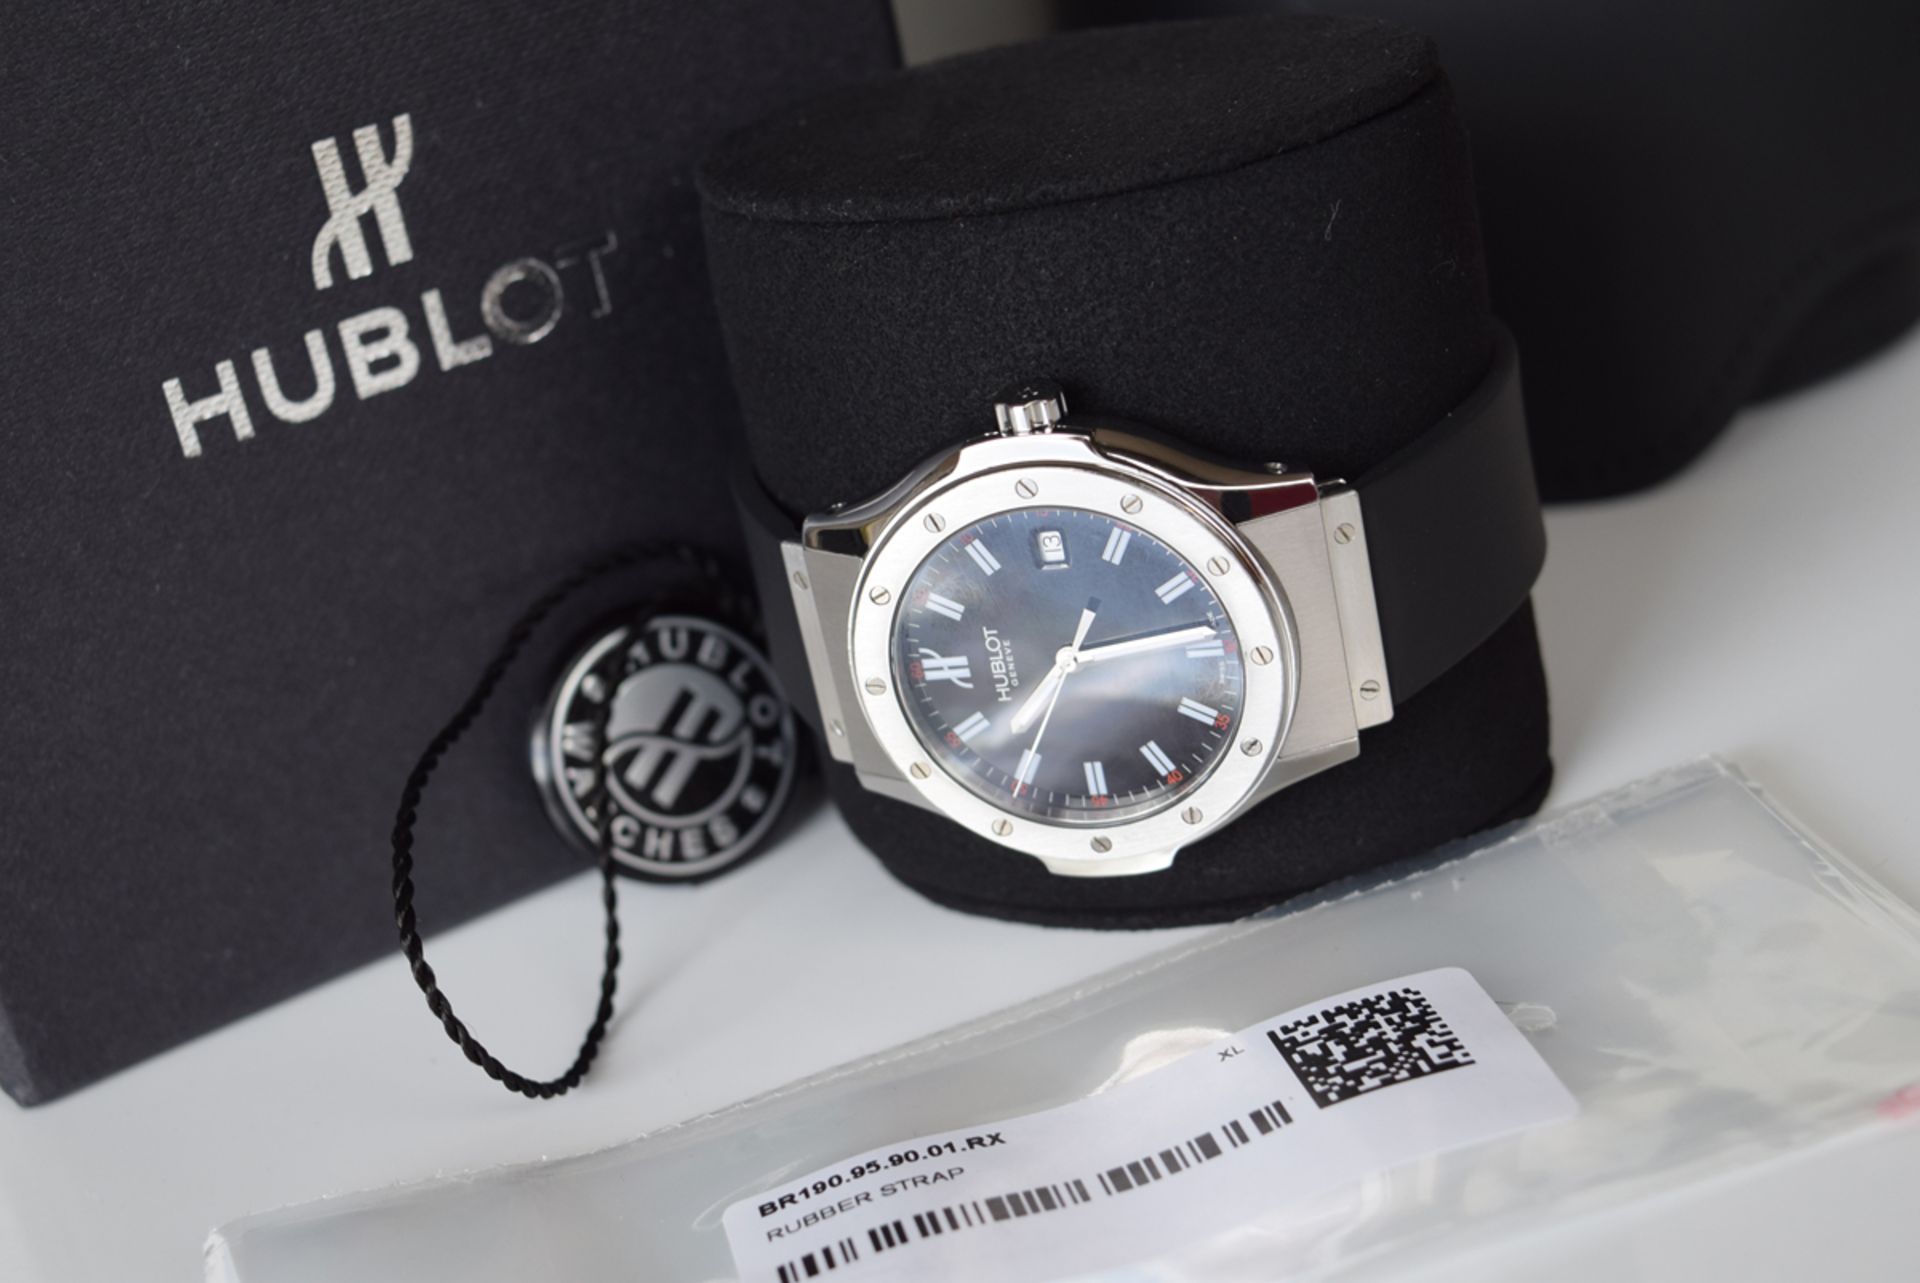 HUBLOT - FUSION (B 1905.1) BLACK DIAL & STAINLESS STEEL CASE! - Image 7 of 8